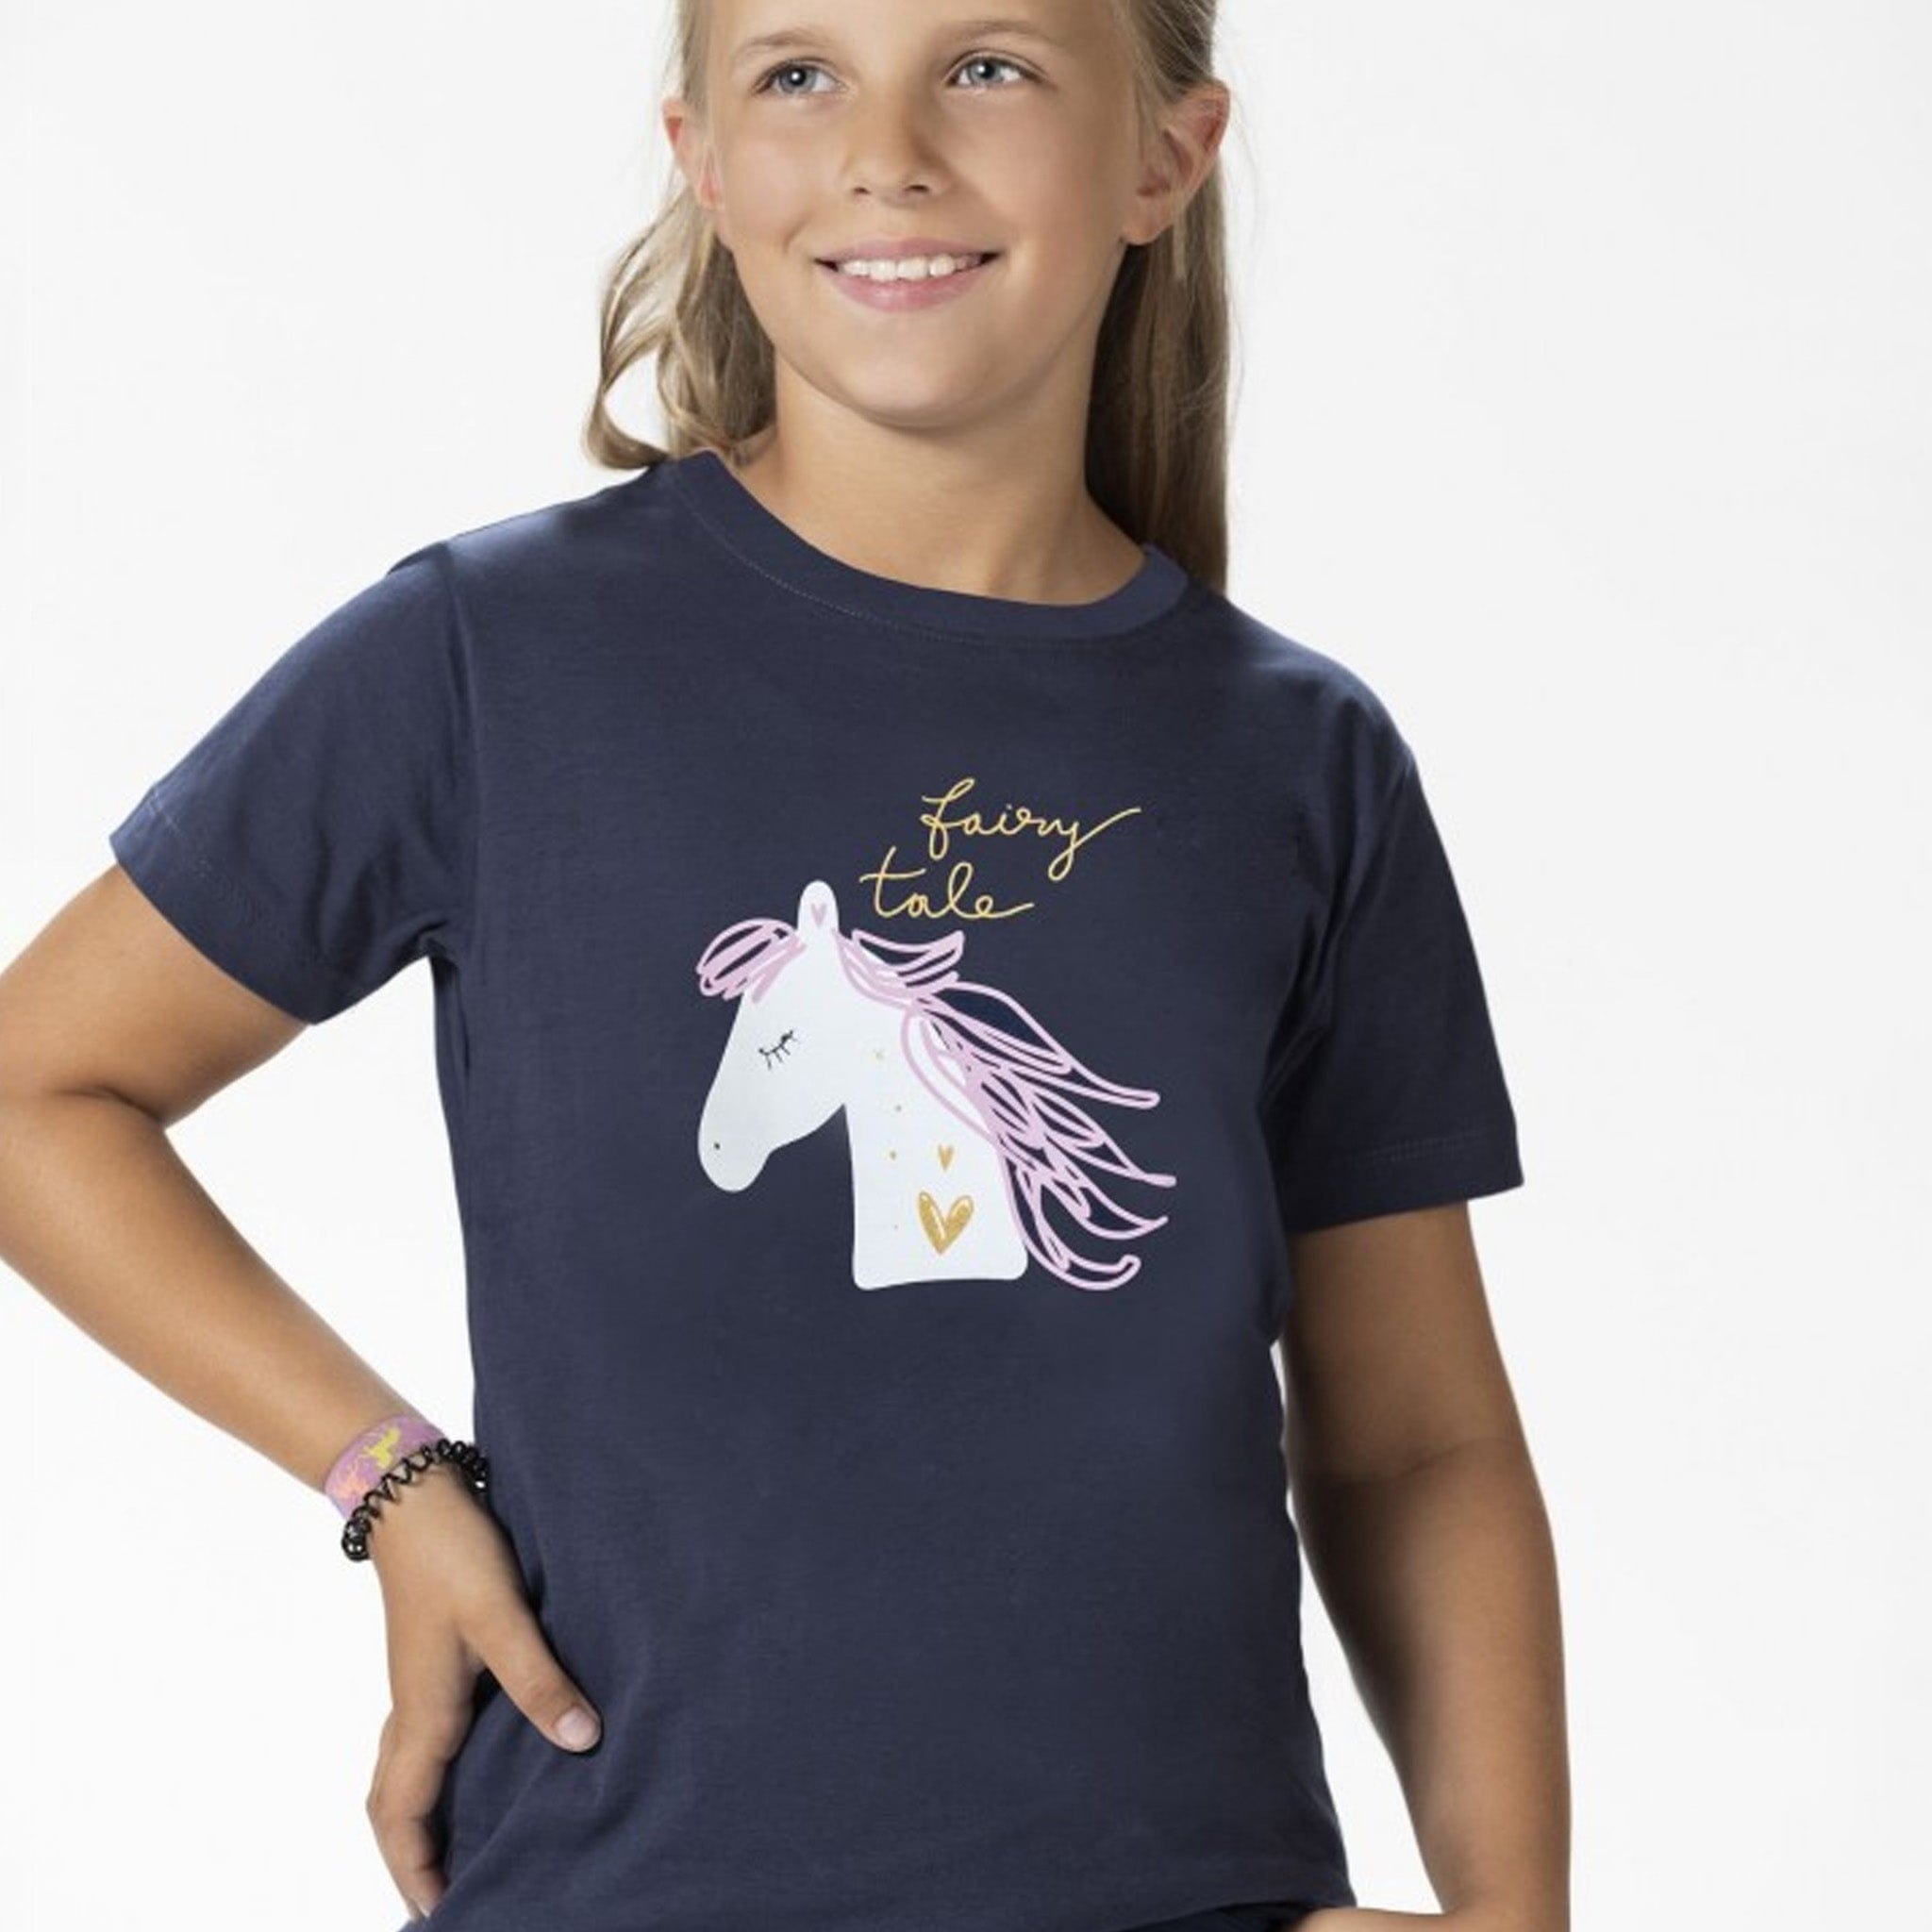 HKM Children's Fairy Tale T-Shirt 13131 Navy Blue Front On Child